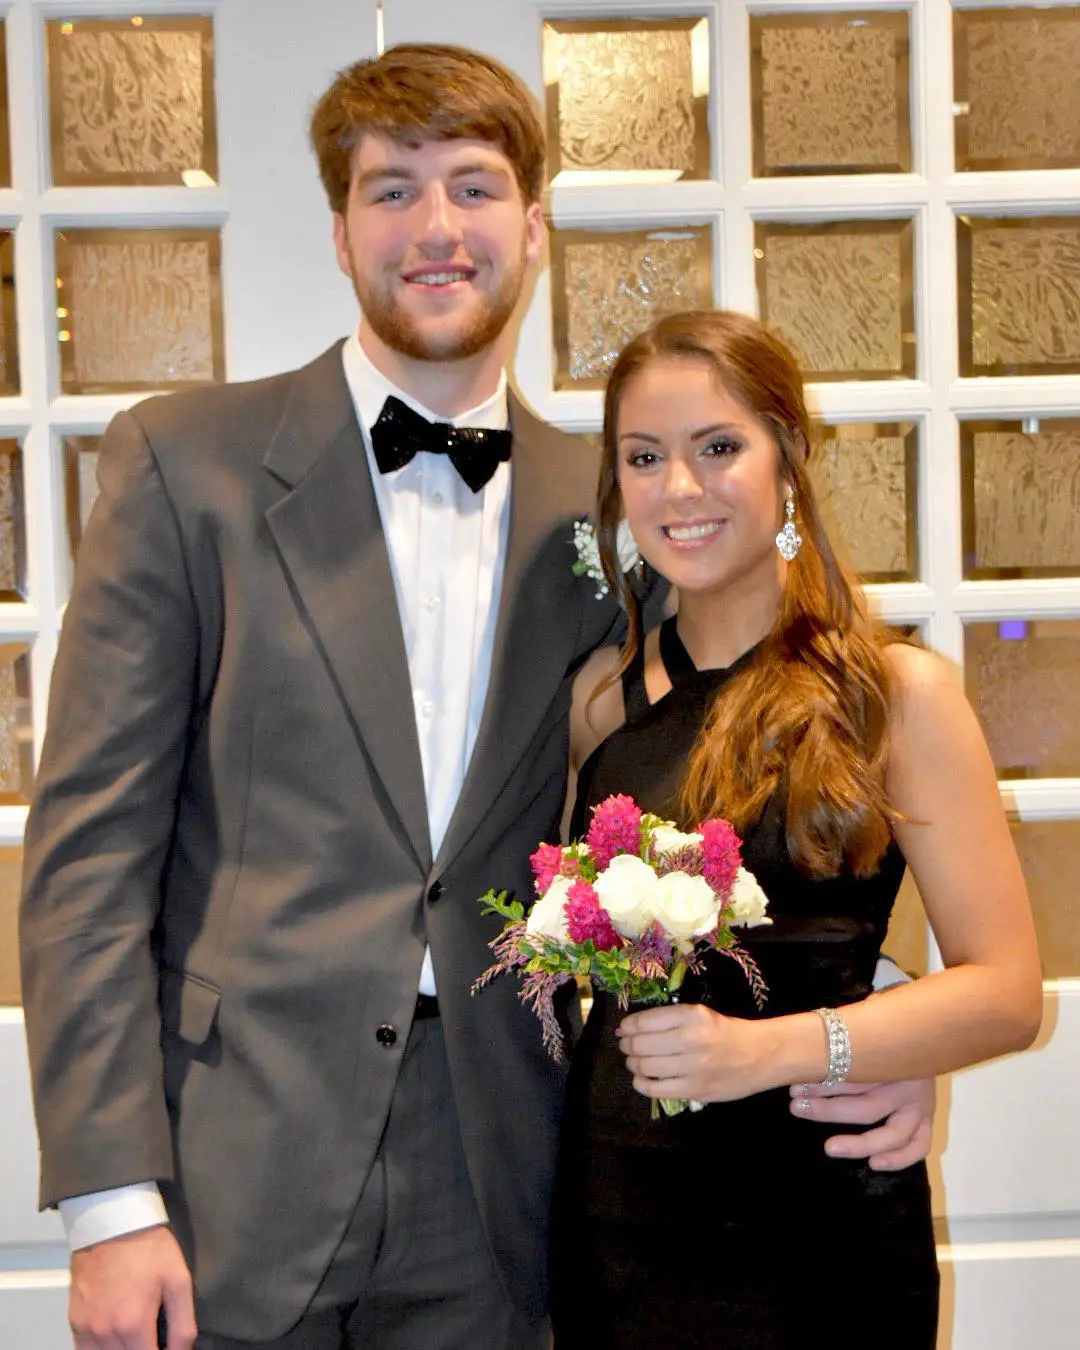 Drew and Lauren going for a prom in April 2019